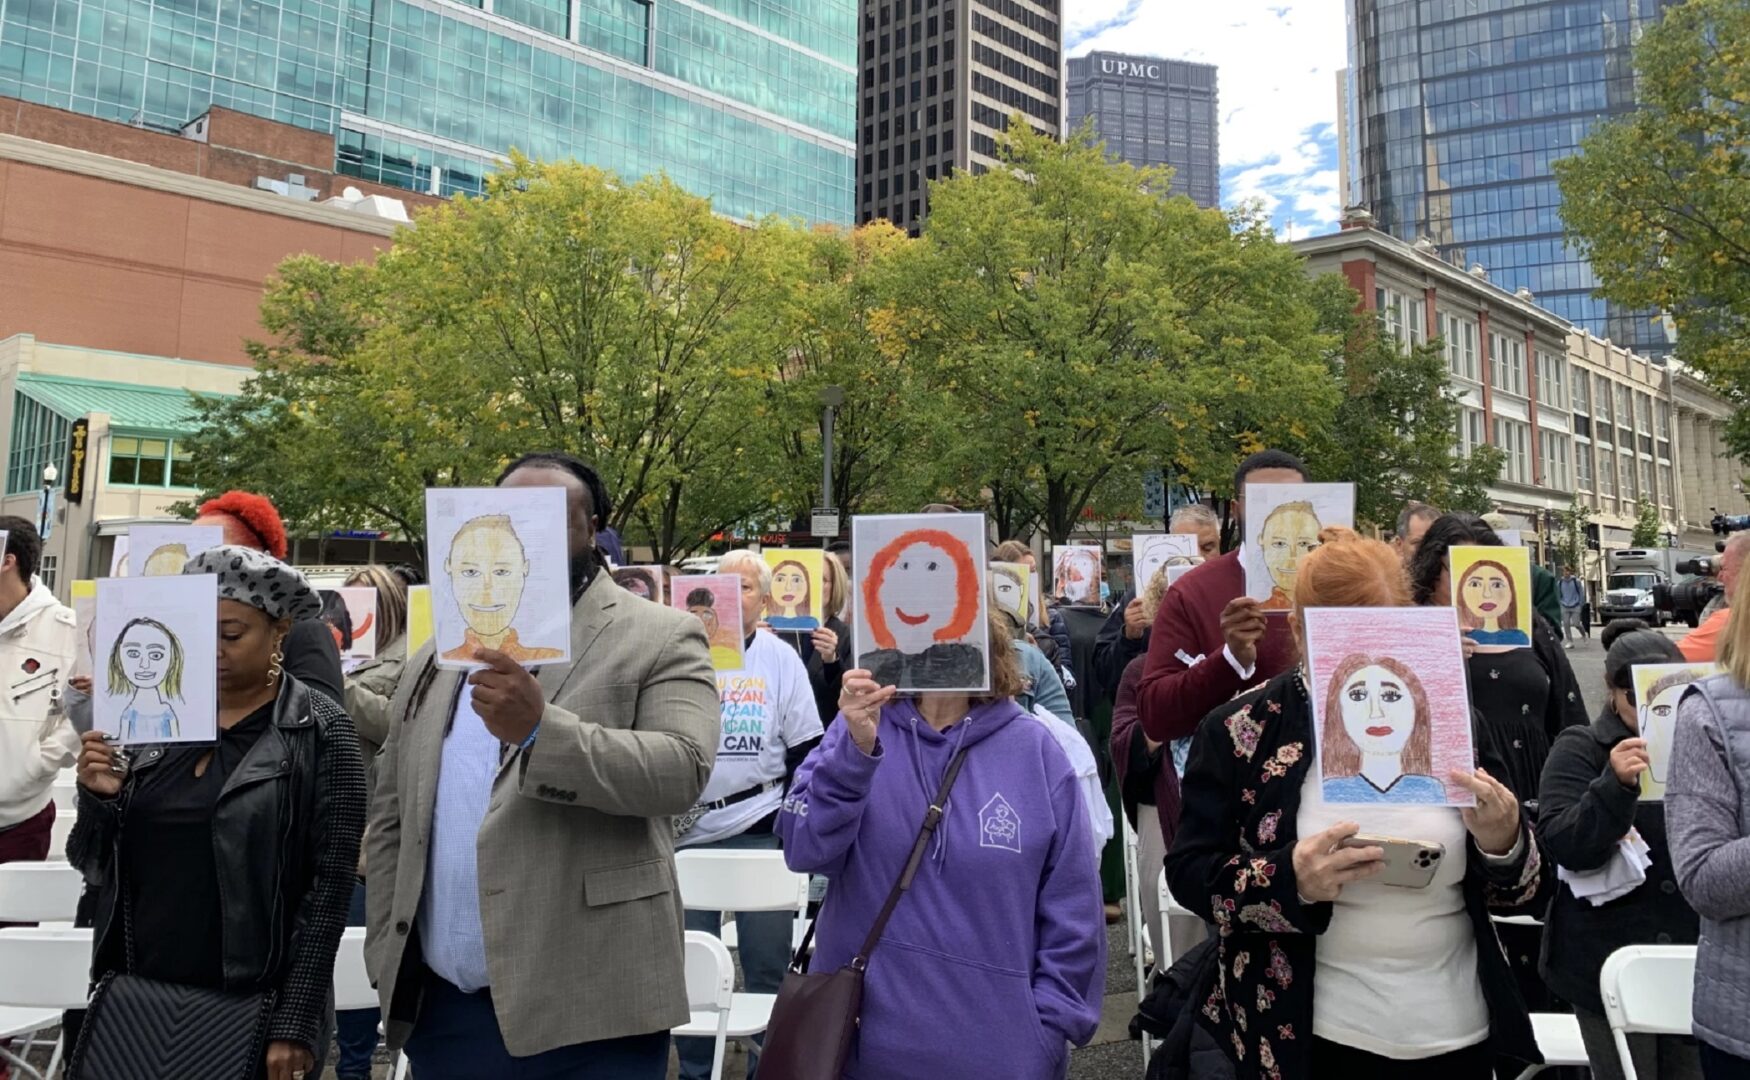 Attendees of a demonstration in Market Square on Tuesday, Oct. 4, 2022 hold self-portraits of houseless students in Allegheny County. Nearly 3,000 children and youth in the county have been identified as experiencing housing instability.